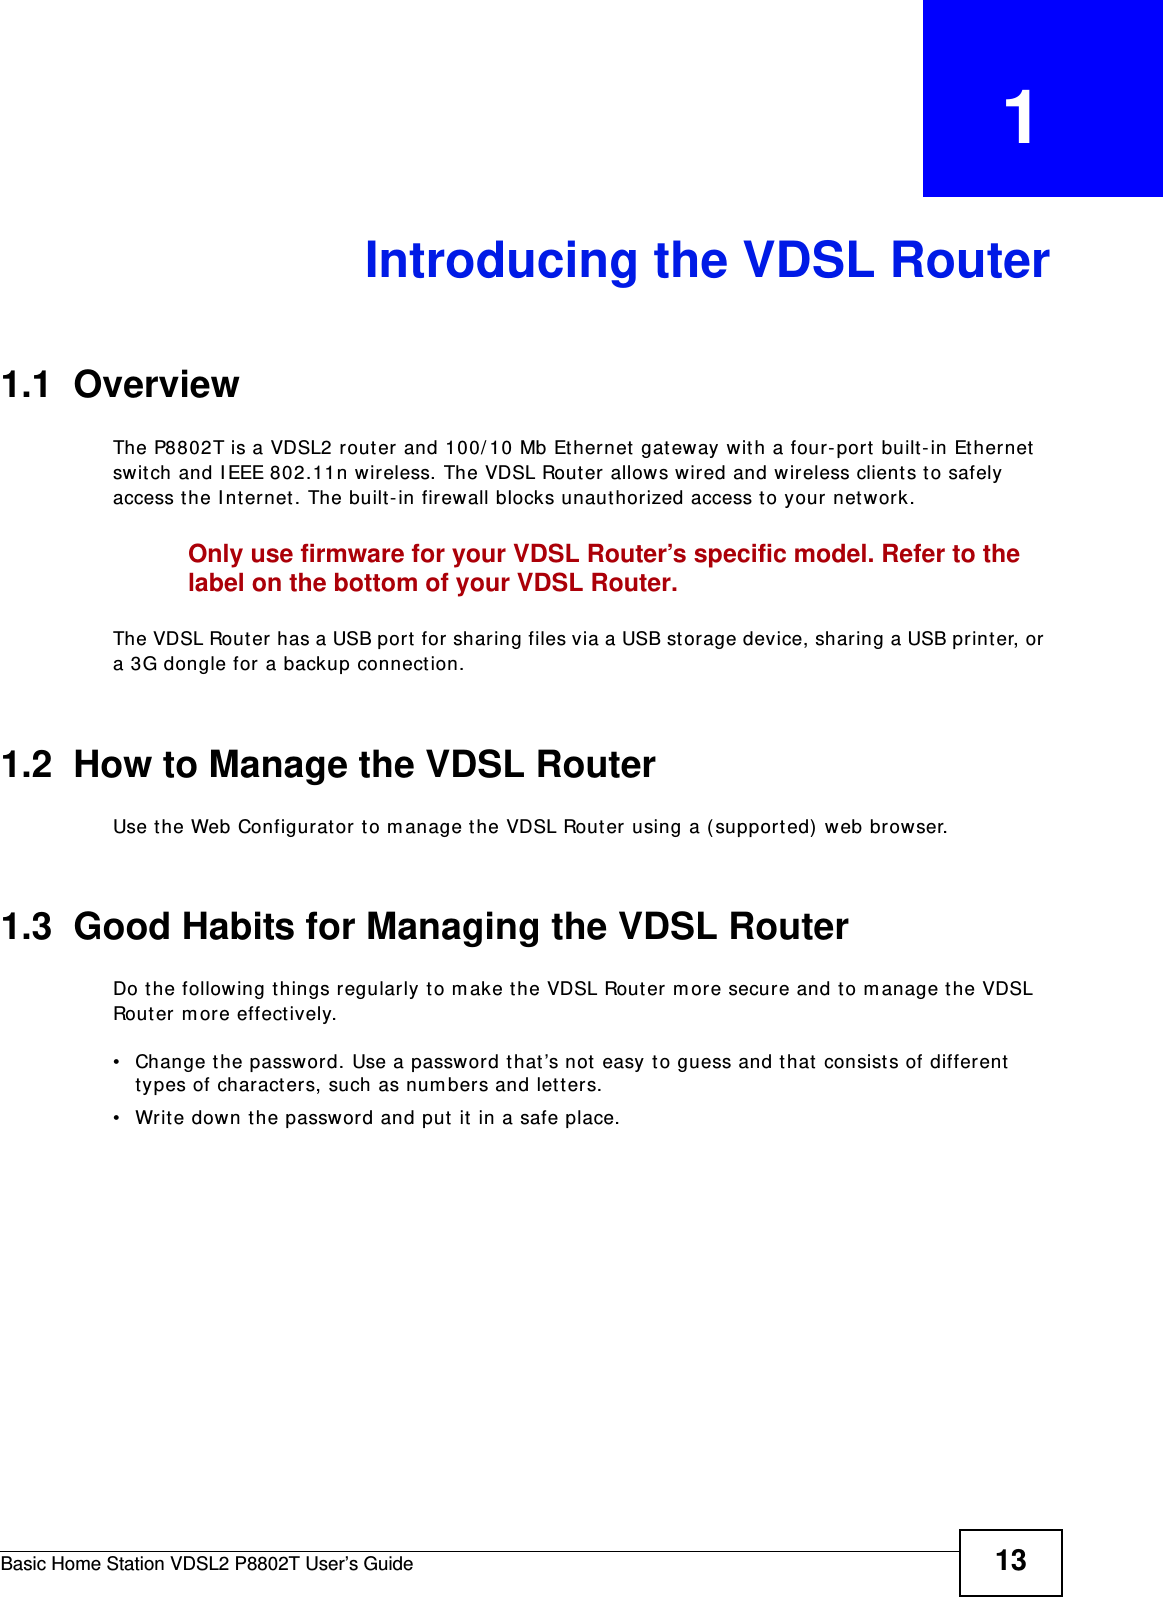 Basic Home Station VDSL2 P8802T User’s Guide 13CHAPTER   1Introducing the VDSL Router1.1  OverviewThe P8802T is a VDSL2 router and 100/ 10 Mb Et hernet  gat eway wit h a four-port built-in Et hernet swit ch and I EEE 802.11n wireless. The VDSL Rout er allows wired and wireless client s to safely access the I nternet. The built-in firewall blocks unaut horized access to your network.Only use firmware for your VDSL Router’s specific model. Refer to the label on the bottom of your VDSL Router.The VDSL Rout er has a USB port  for sharing files via a USB st orage device, sharing a USB print er, or  a 3G dongle for a backup connect ion. 1.2  How to Manage the VDSL RouterUse t he Web Configurat or to m anage t he VDSL Router using a (supported)  web browser.1.3  Good Habits for Managing the VDSL RouterDo the following things regularly to m ake t he VDSL Router m ore secure and t o m anage t he VDSL Router m ore effect ively.• Change t he password. Use a password t hat ’s not  easy t o guess and that consist s of different types of charact ers, such as num bers and lett ers.• Writ e down the password and put it  in a safe place.